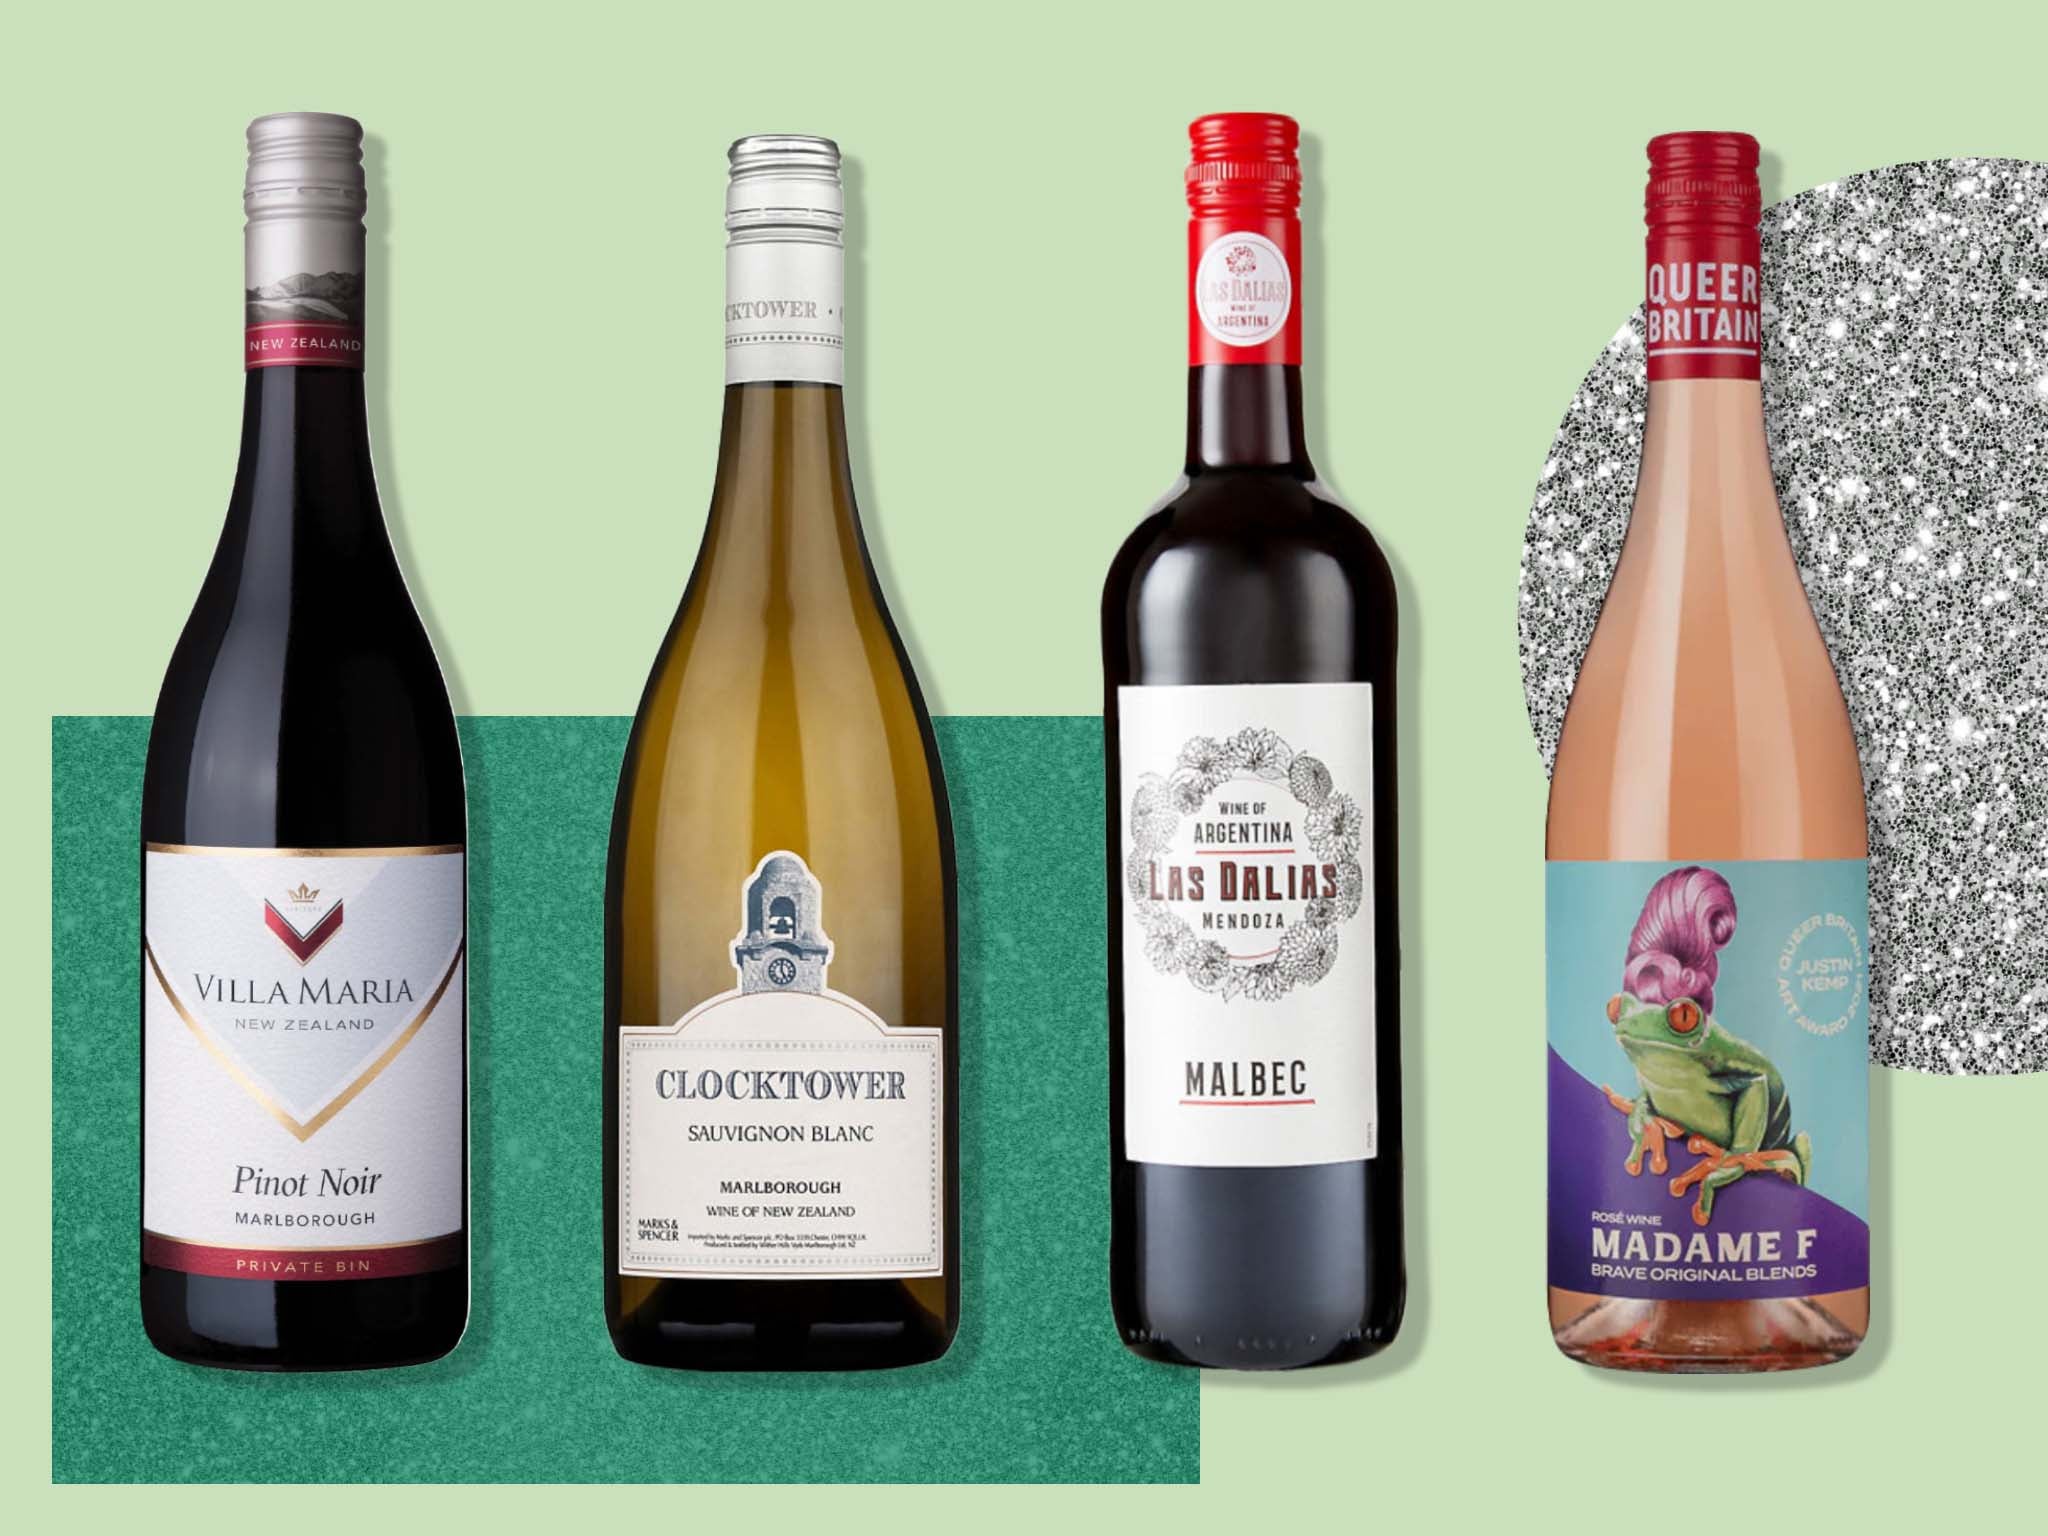 Sip, sip hooray! These bottles are on offer for the holiday season